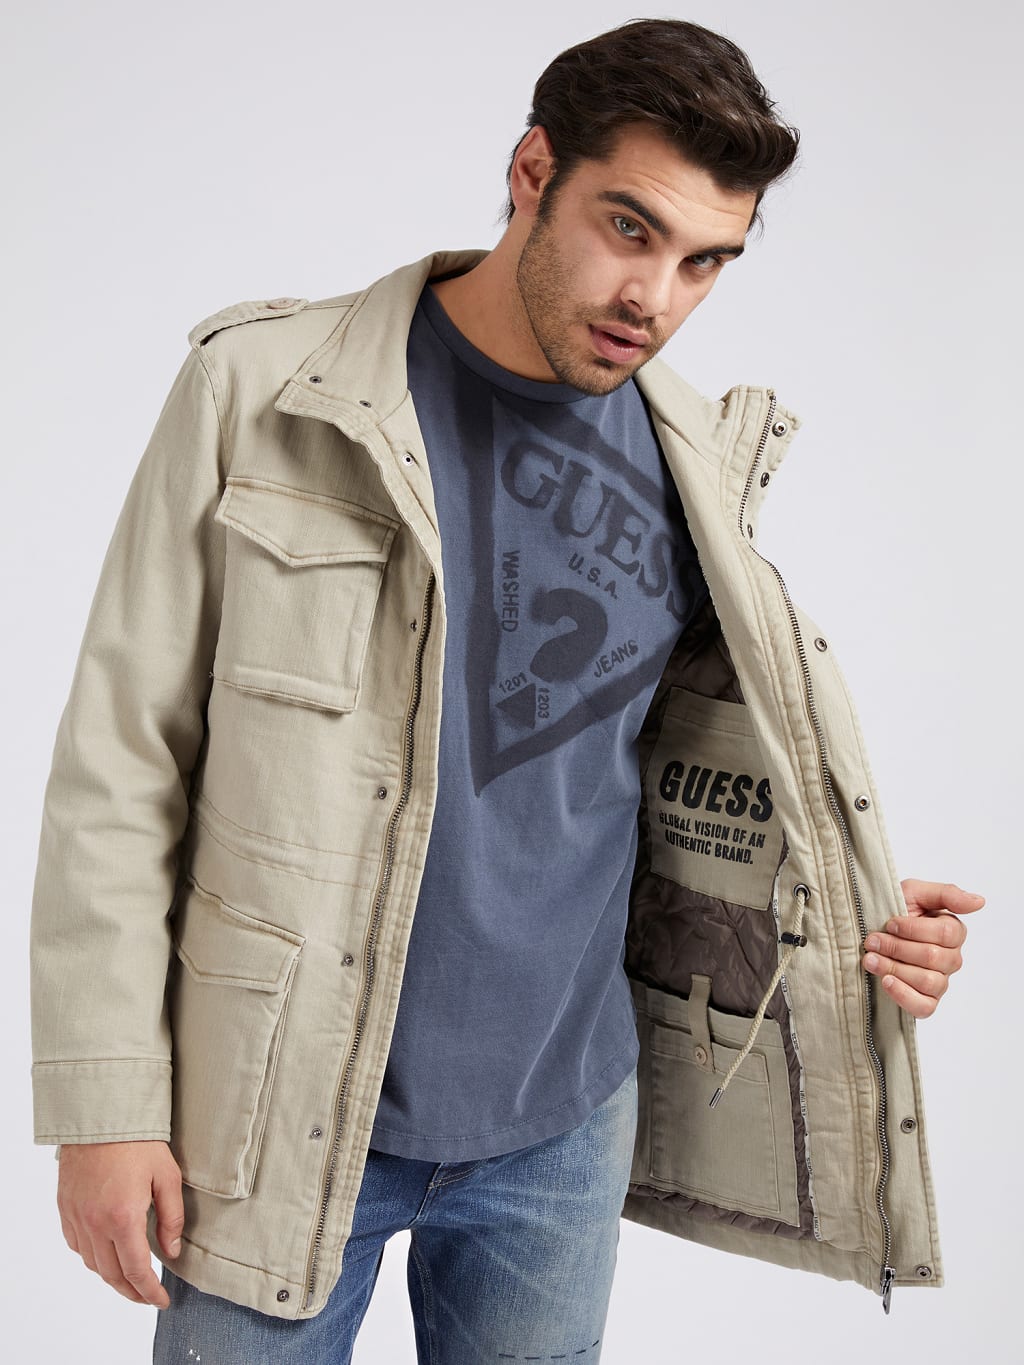 GUESS Men's and Jackets Collection